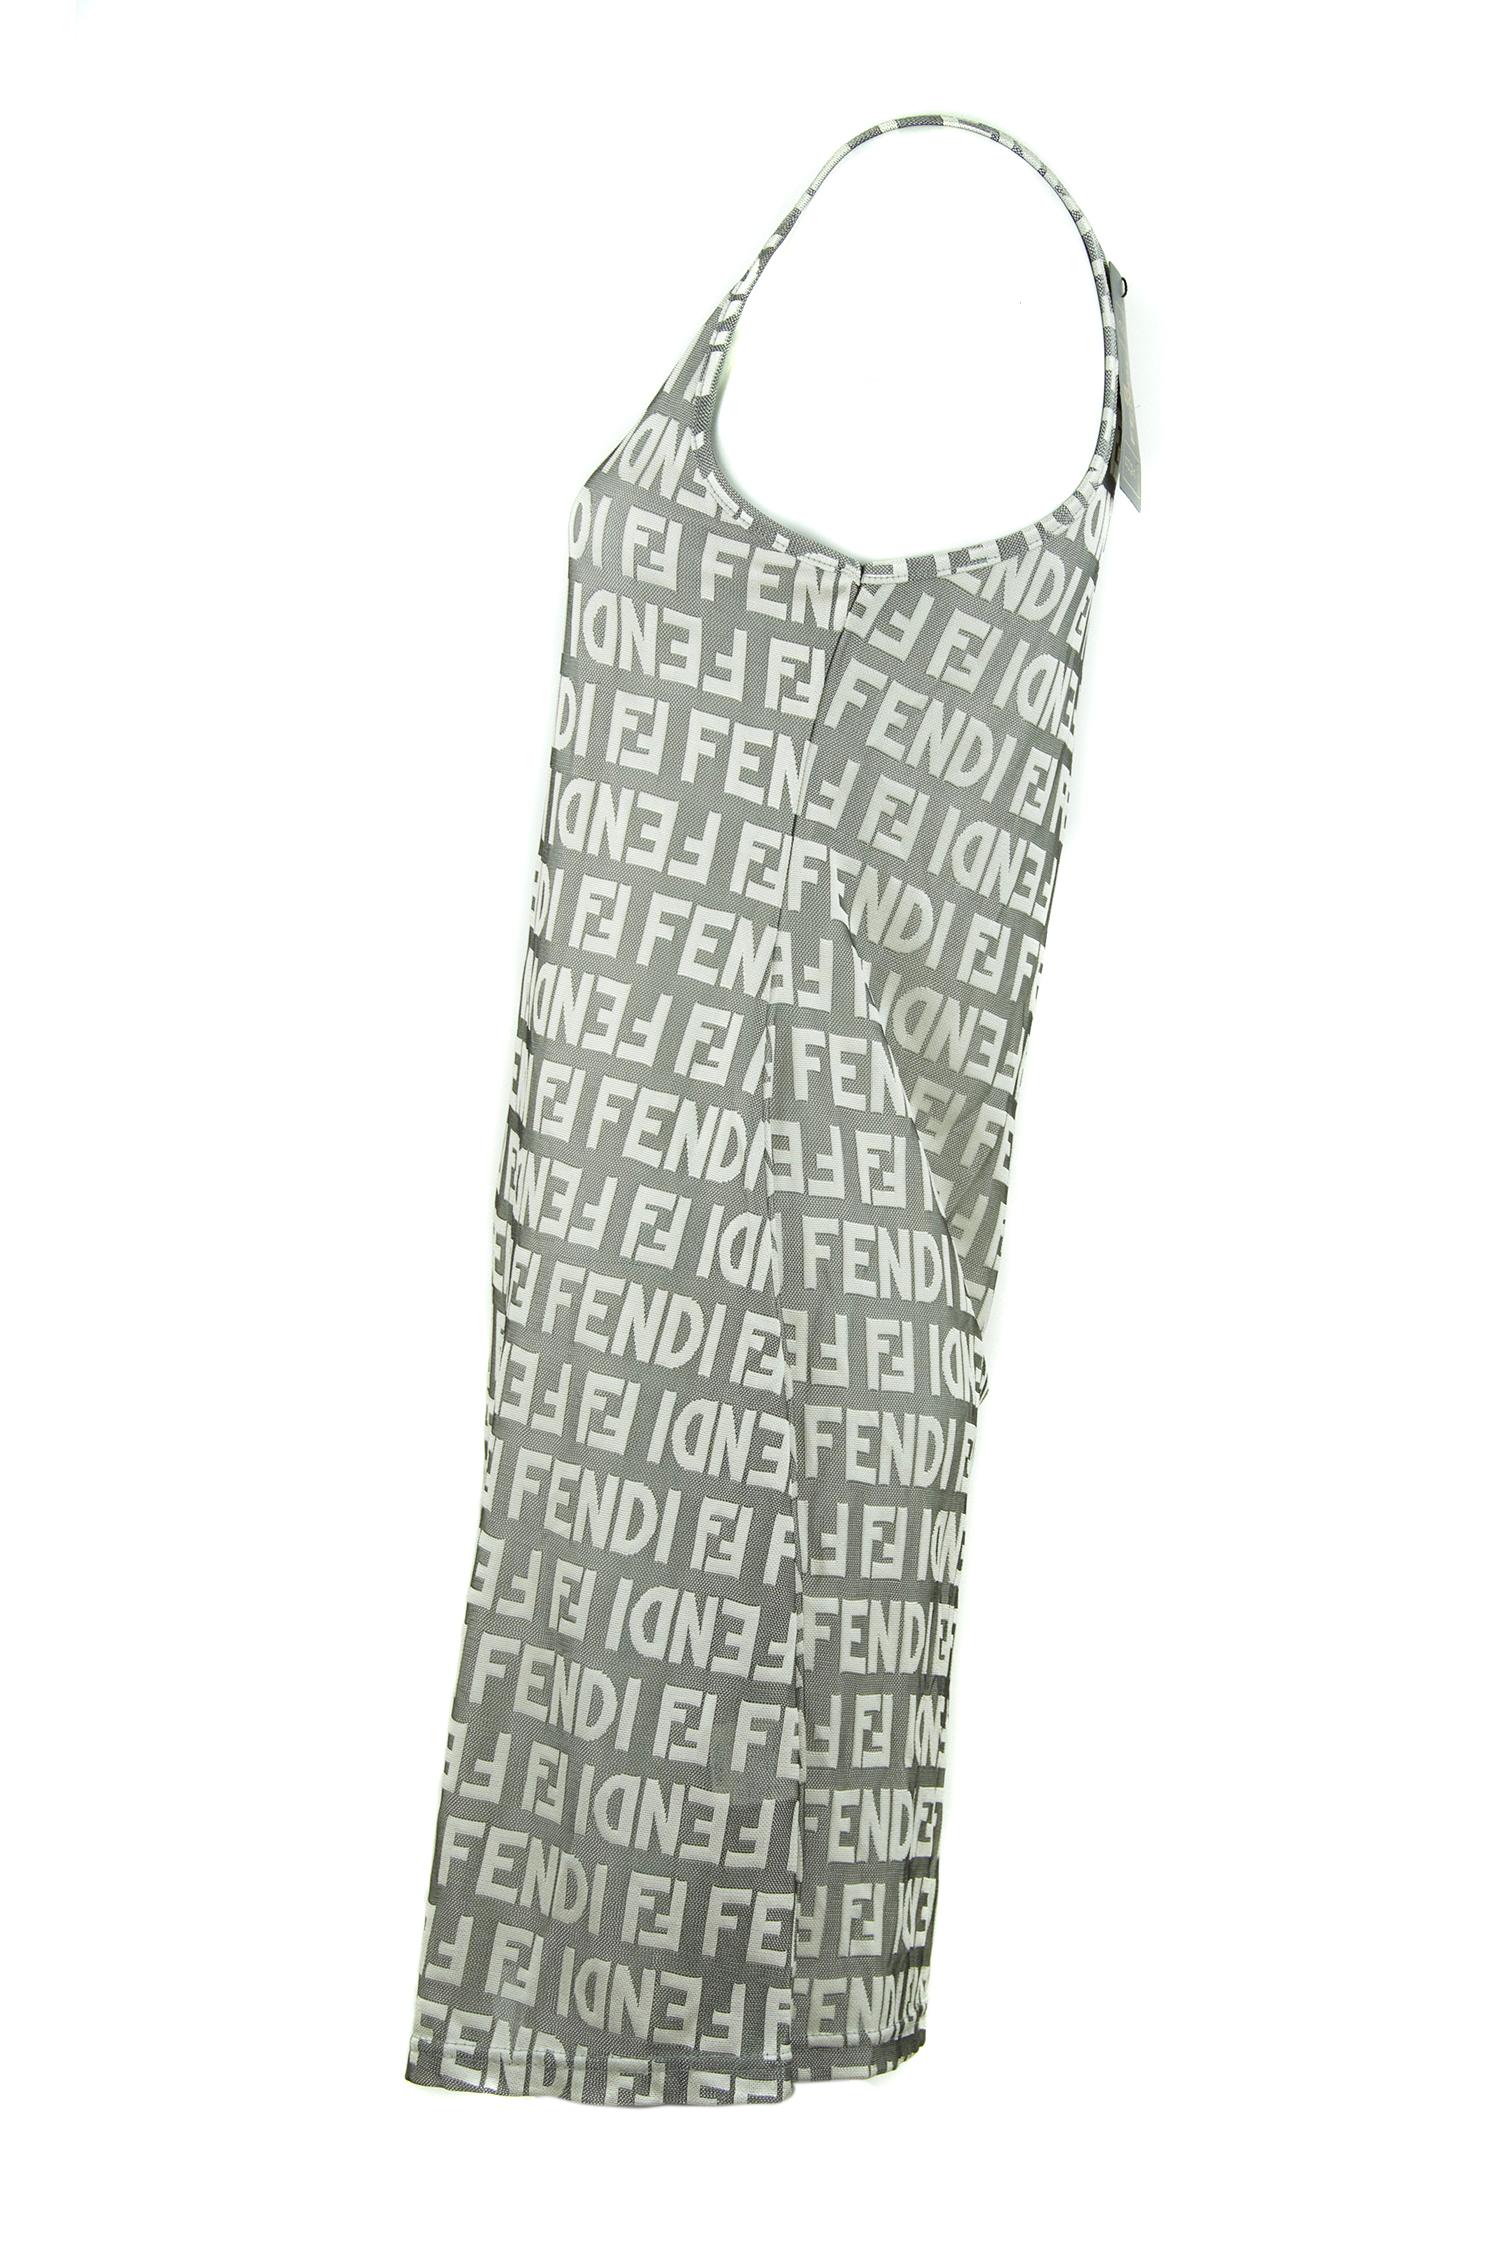 Fendi lovers look no further, this gray and off white Fendi logo dress is the perfect addition to your wardrobe.  The perfect weight for spring summer, this is an easy loose spaghetti strap dress to throw on with a light jacket.  New with